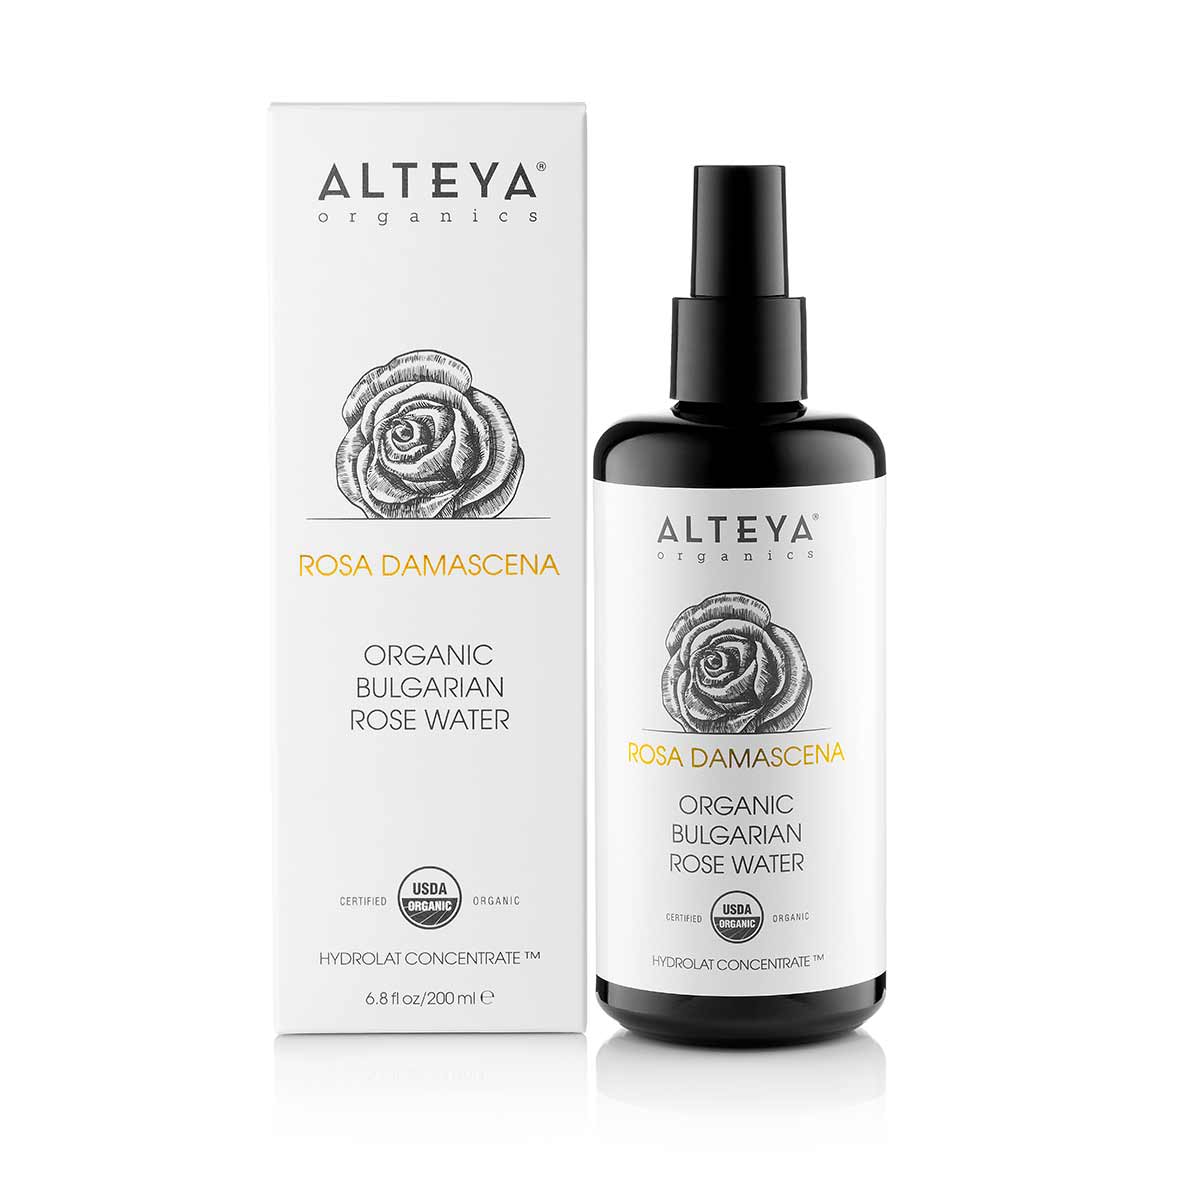 An Alteya Organics Rose Water Toner Mist - 6.8 Fl Oz Violet Glass spray with a box next to it, perfect for enhancing skin.